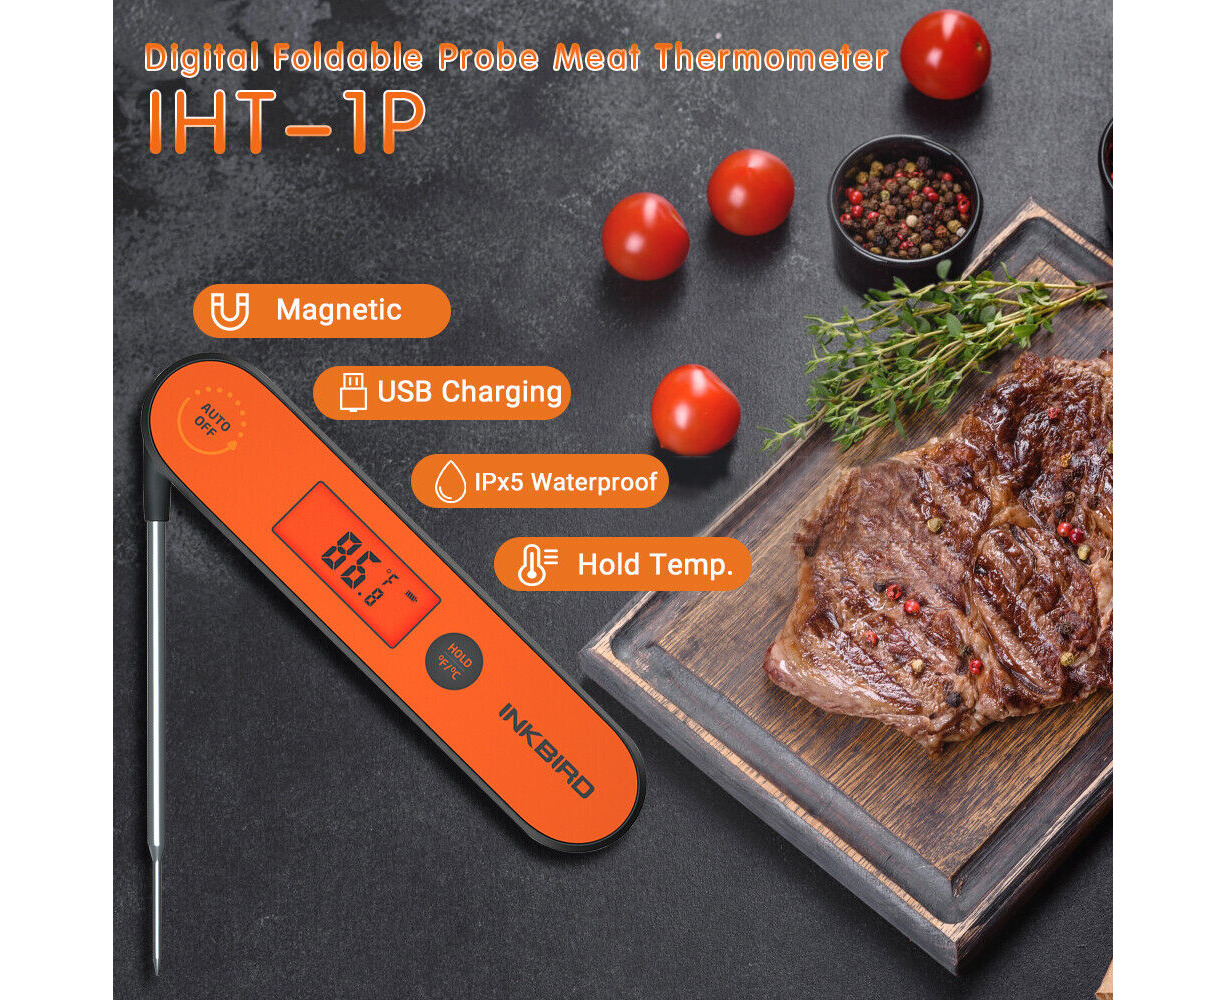 BBQ GO Digital Meat Thermometer BG-HH1C, Instant Read Meat Thermometer with  Calibration, Magnet, Foldable Probe 